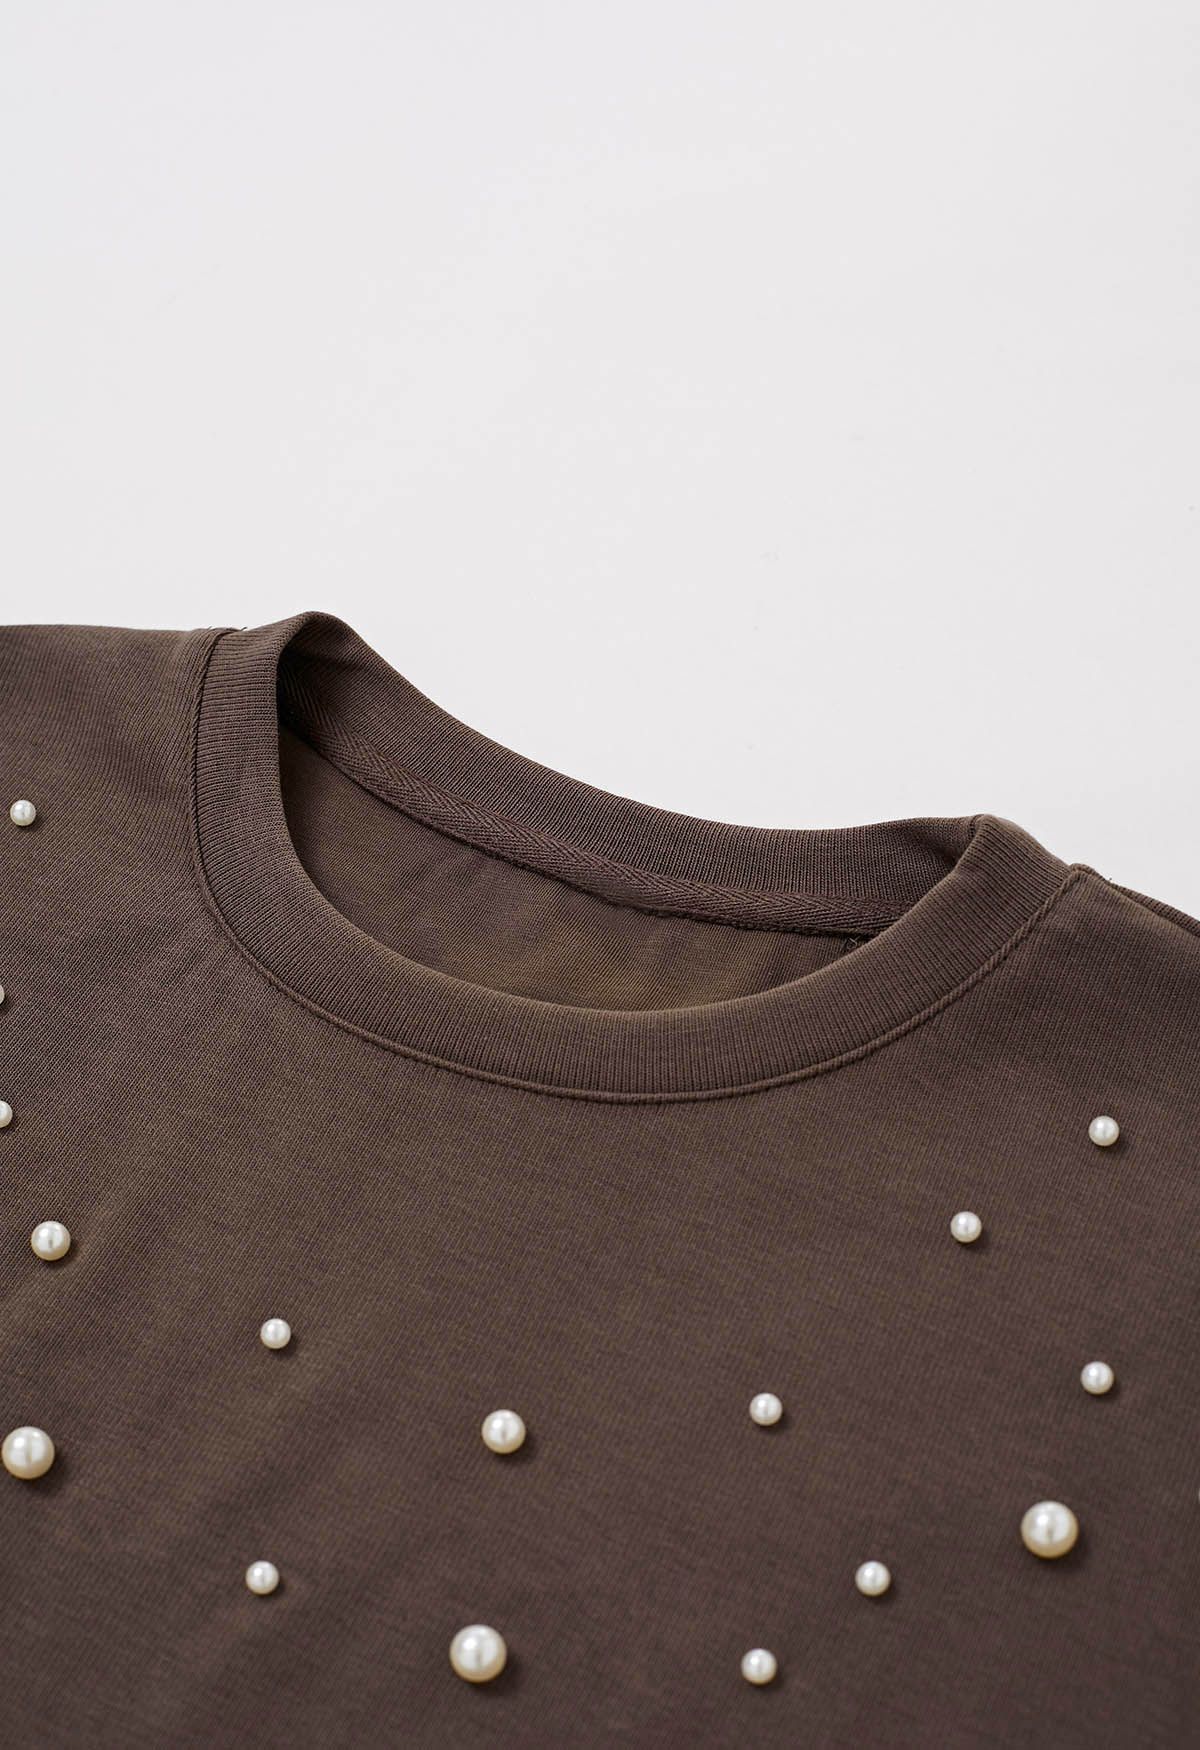 Sophisticated Pearl Trim T-Shirt in Brown